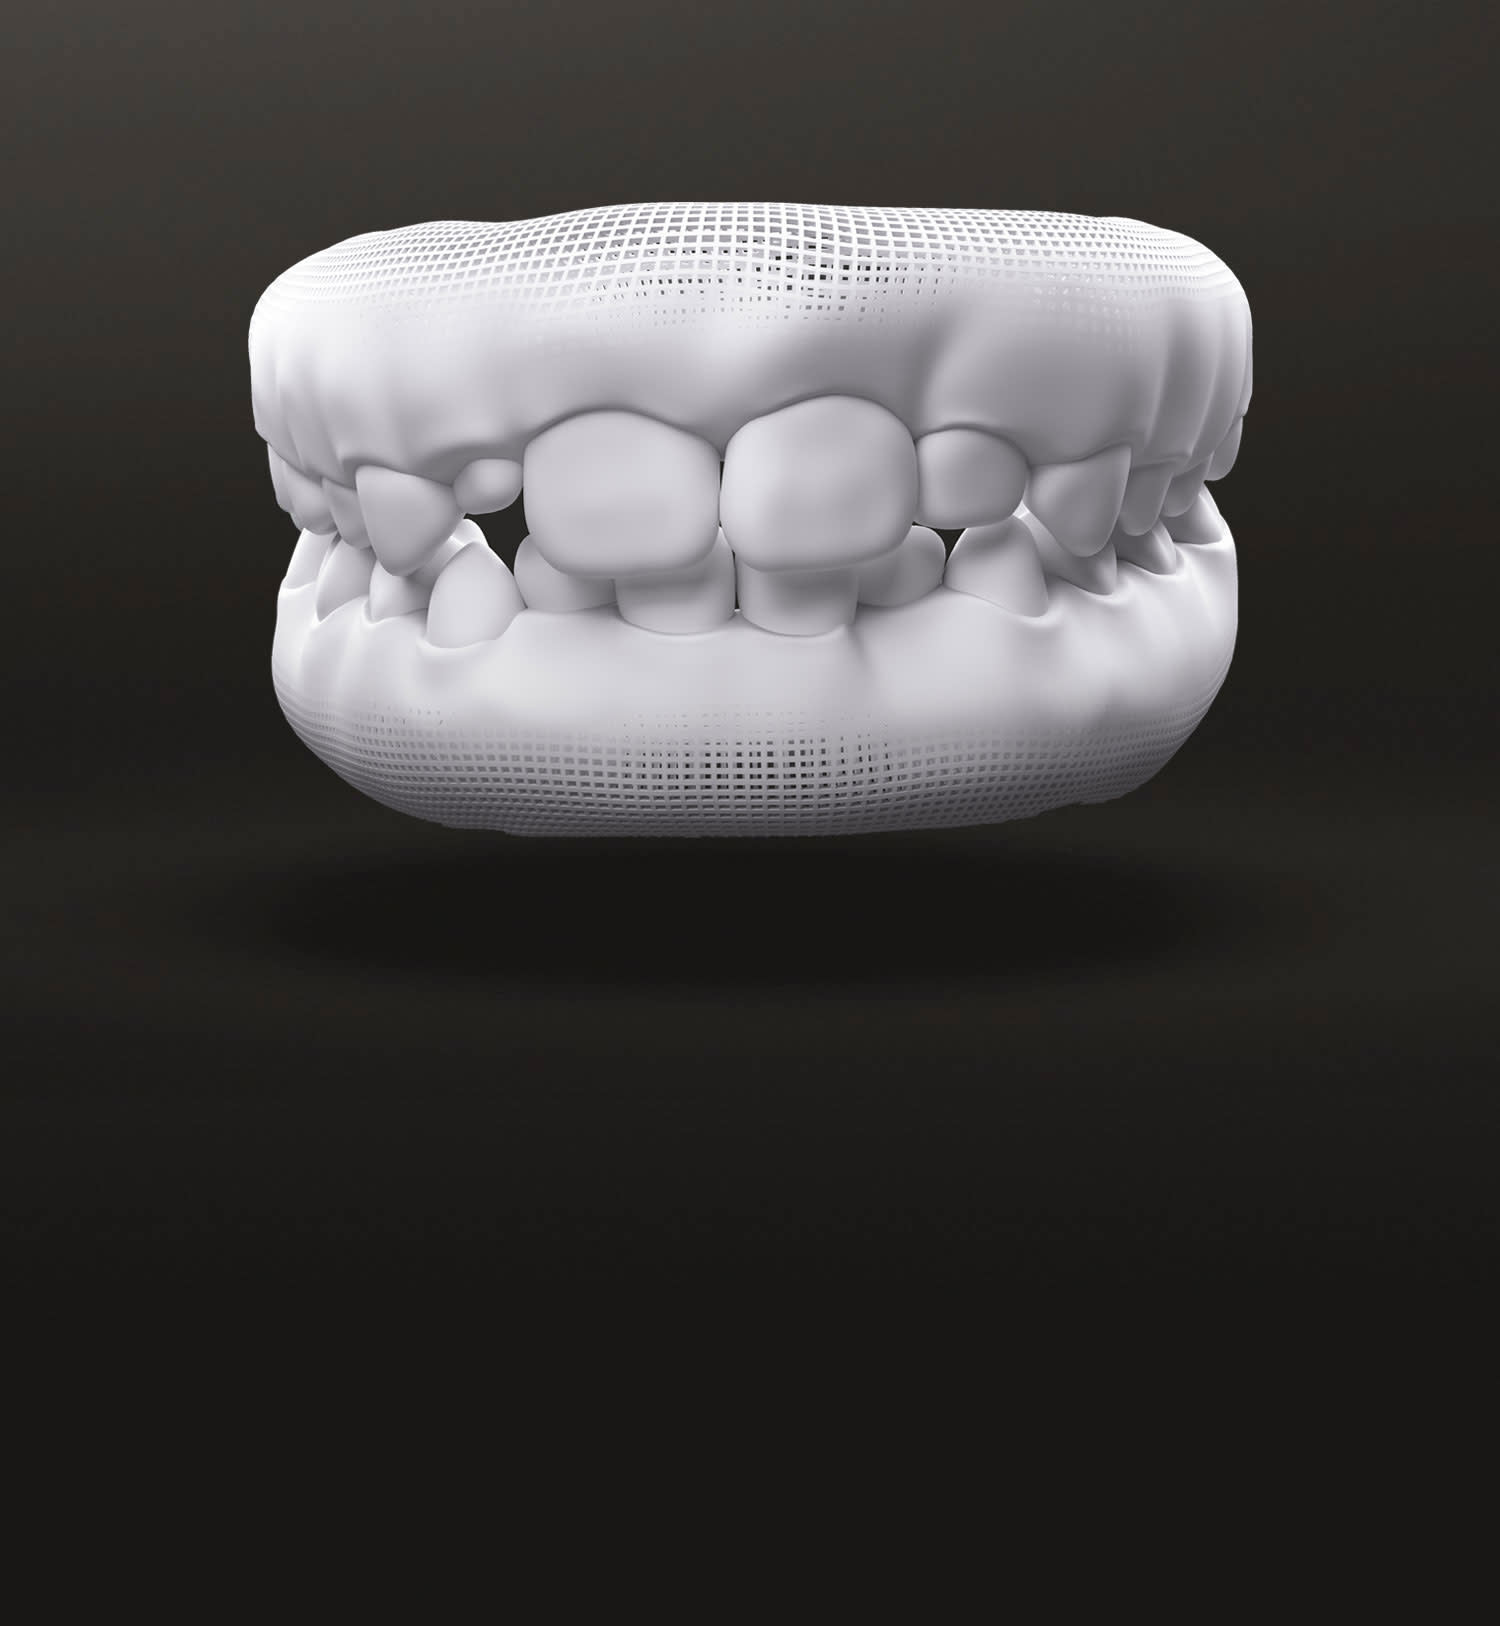 Baby and permanent teeth model -  Treatable cases - Invisalign Europe